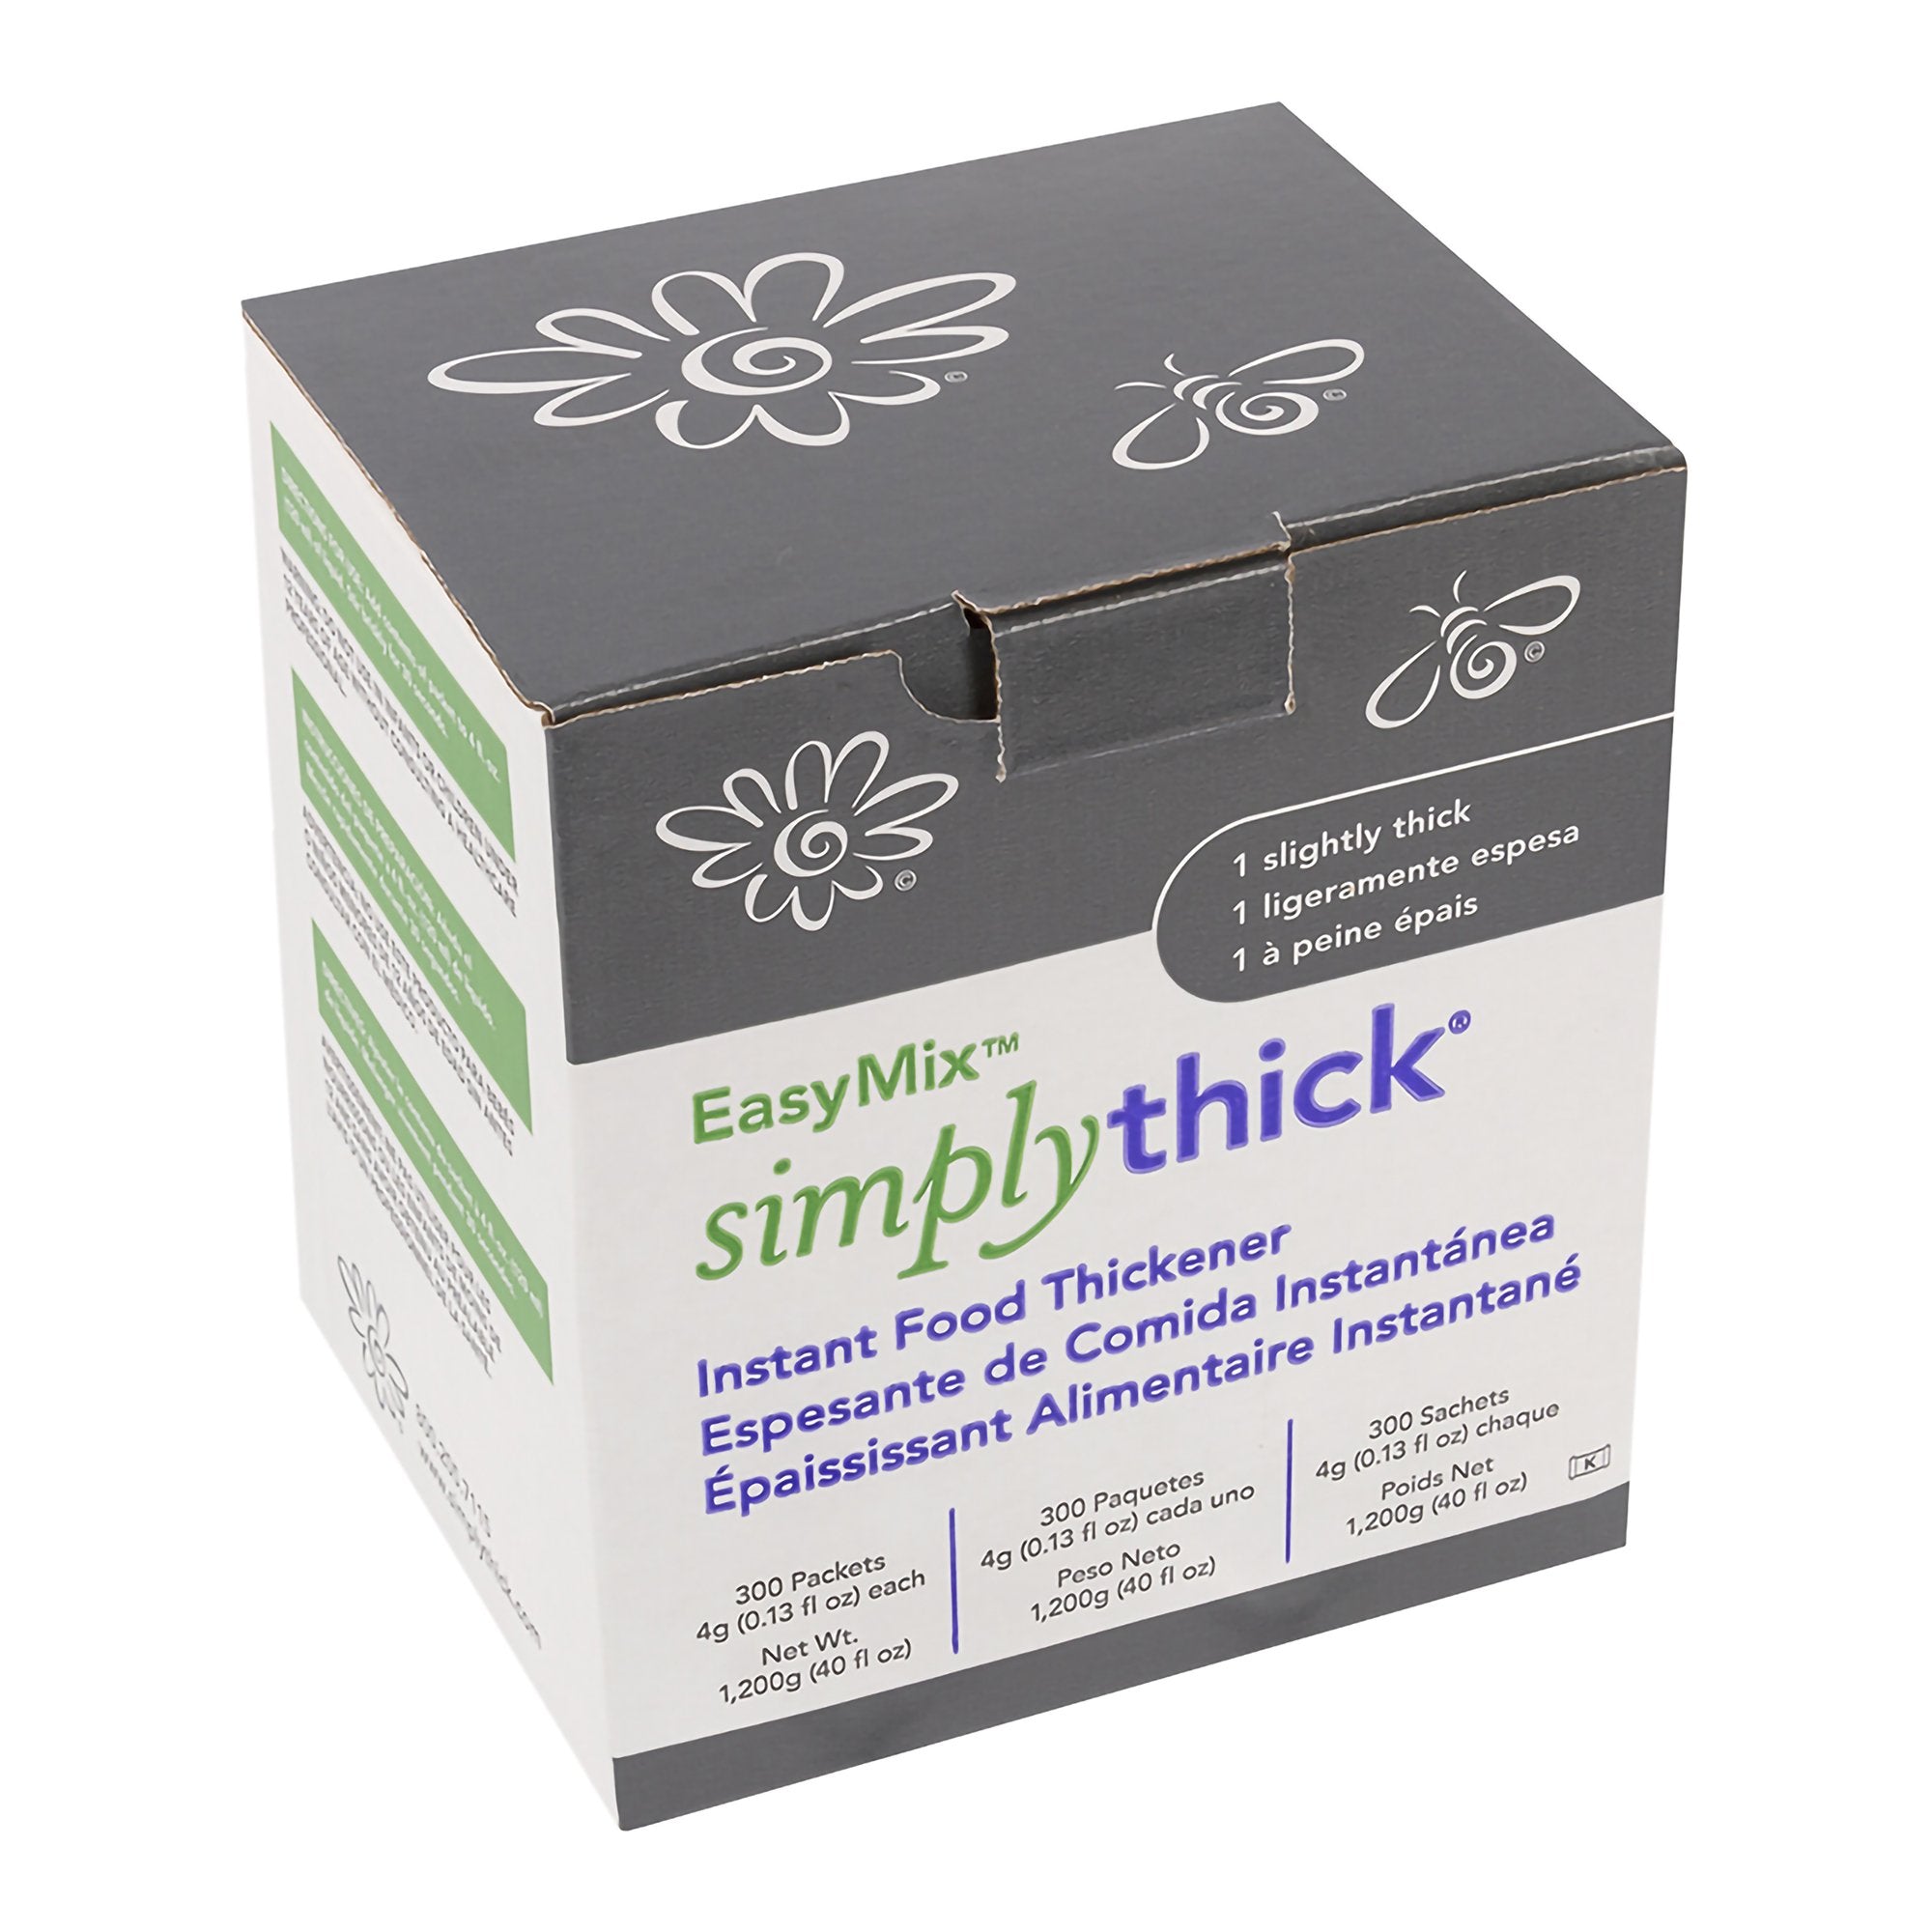 Food and Beverage Thickener SimplyThick Easy Mix 4 oz. Individual Packet Unflavored Gel IDDSI Level 1 Slightly Thick